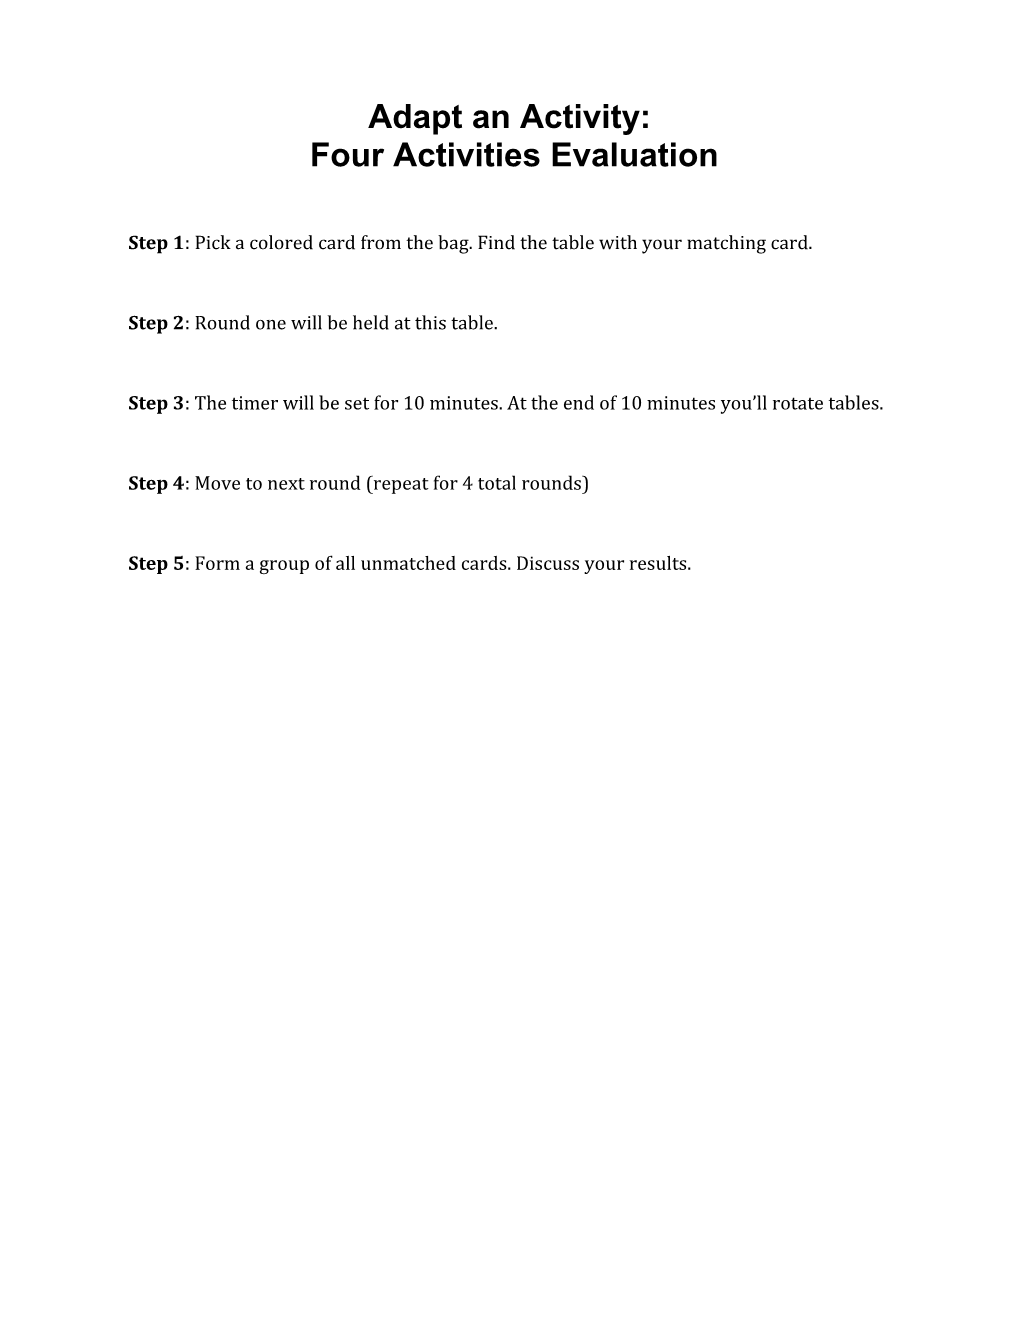 Adapt an Activity: Four Activities Evaluation